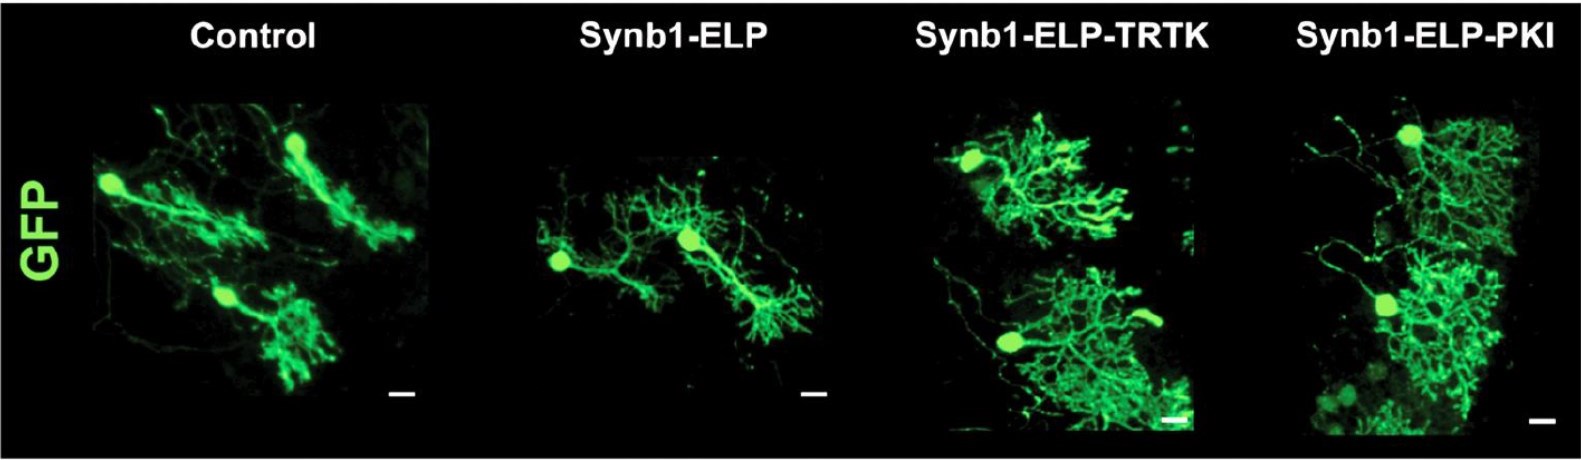 Purkinje neurons affected by SCA1 lose their branches (control). ELP on its own doesn't fix the damage (Synb1-ELP), but when a therapeutic is attached (TRTK and PKI), the neurons recover.